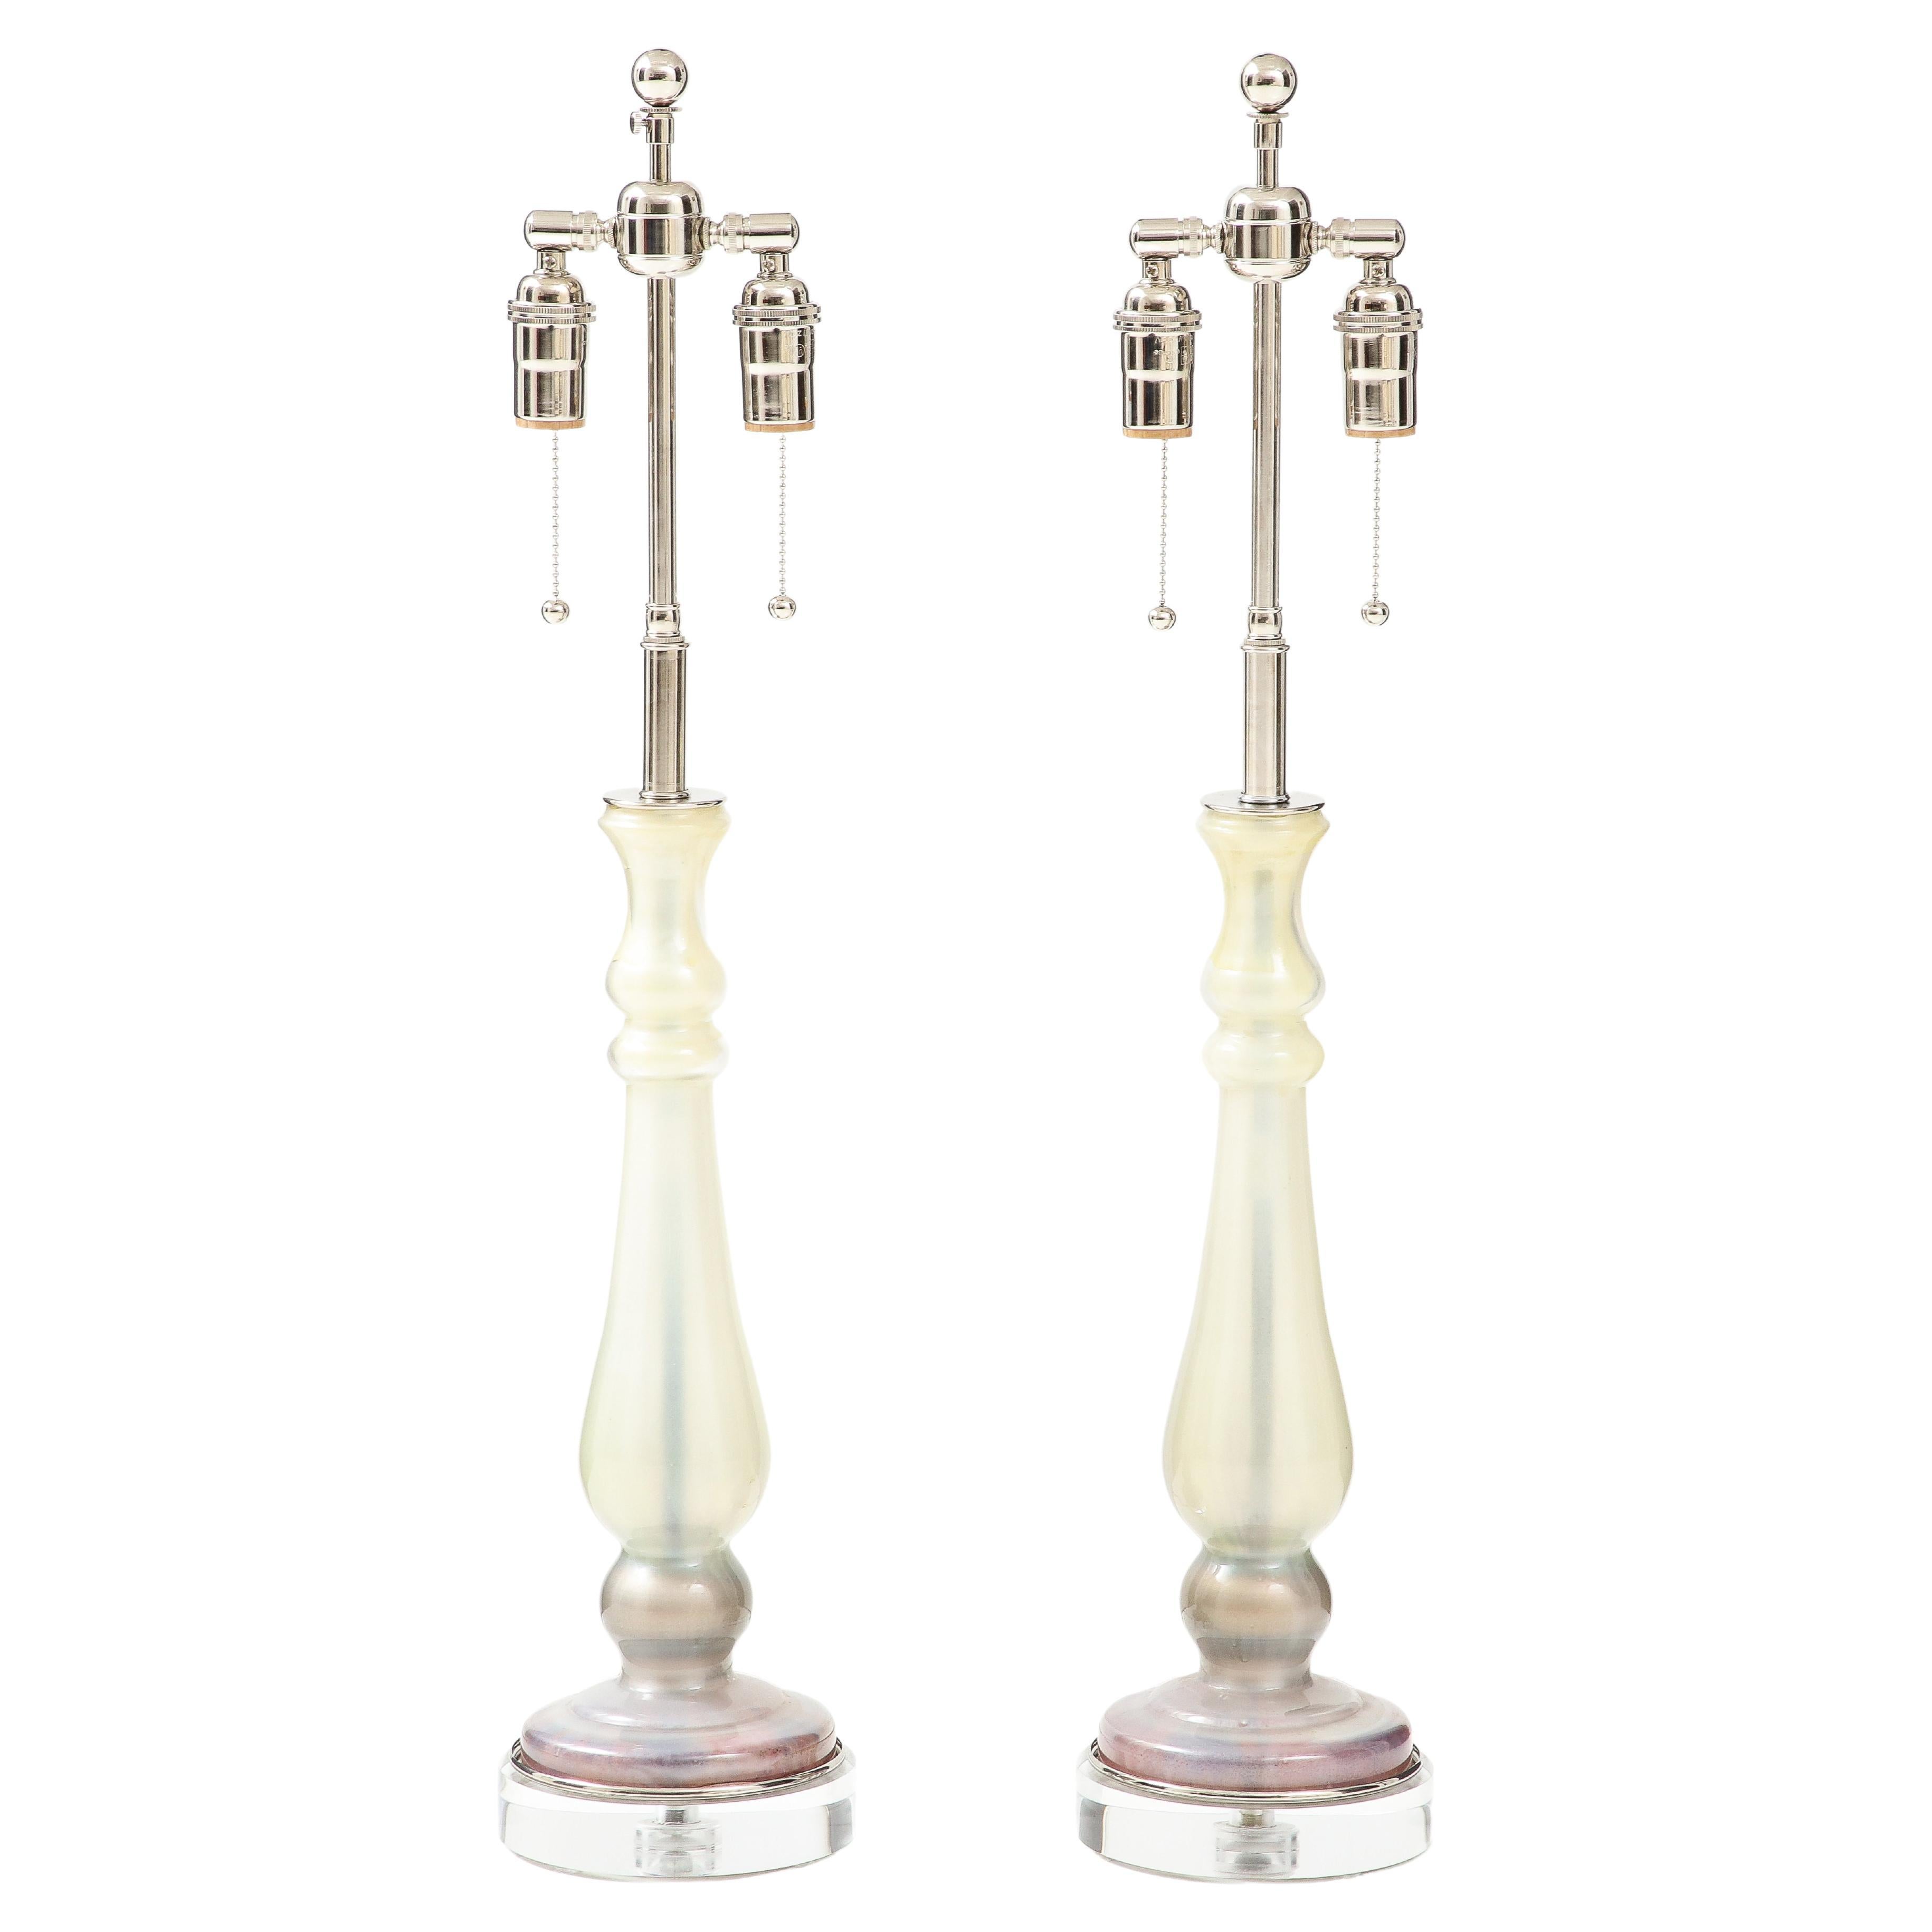 Pair of 1980's Glass Candlestick Lamps.